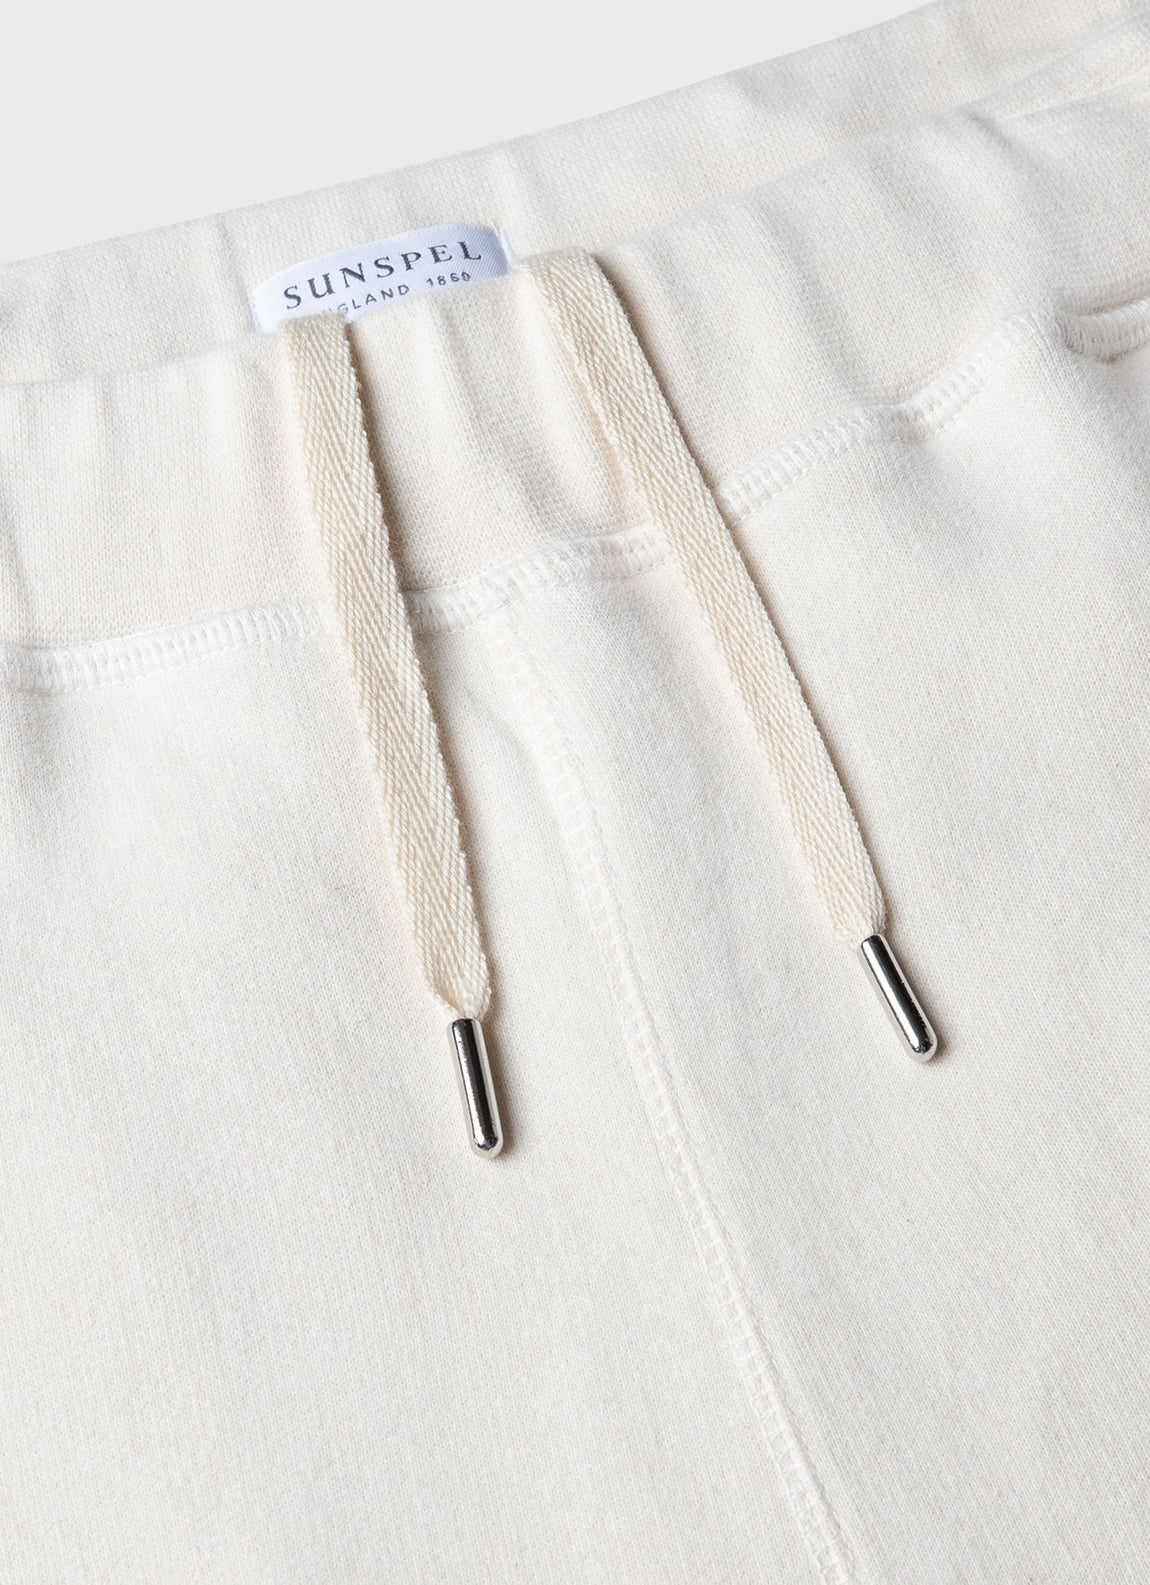 Men's Loopback Tracksuit in Undyed